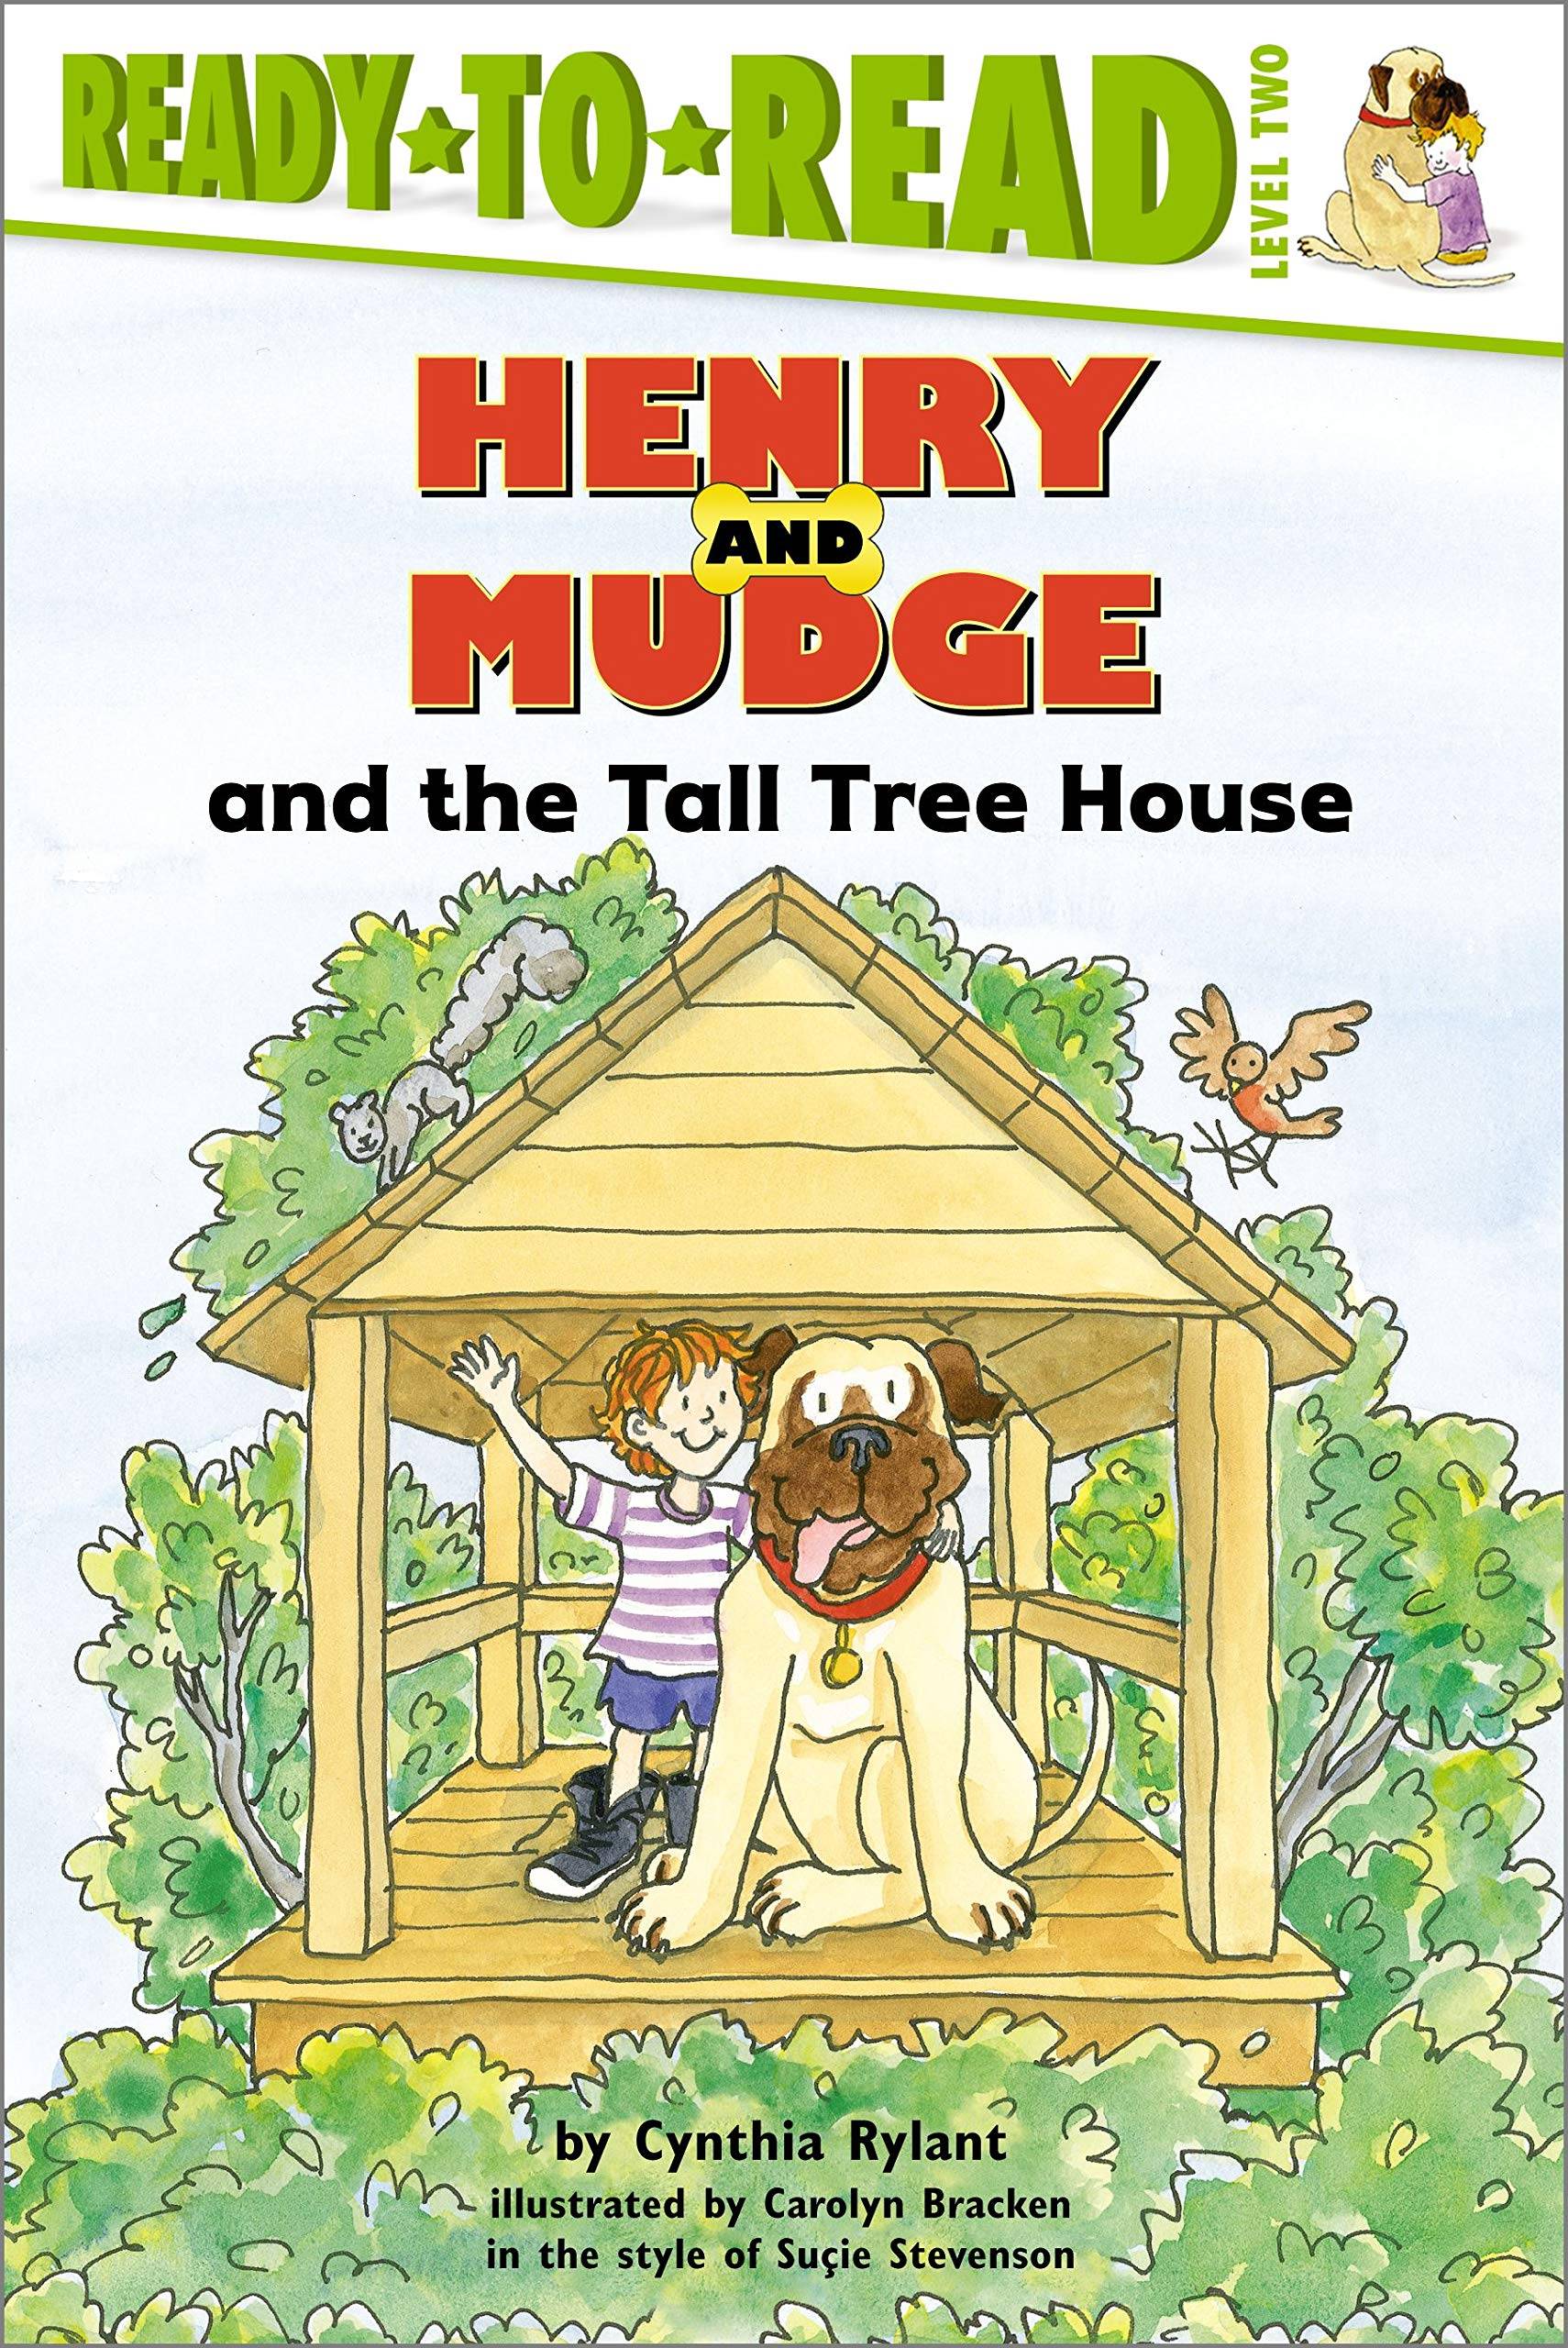 IMG : Henry And Mudge and the Tall Tree House